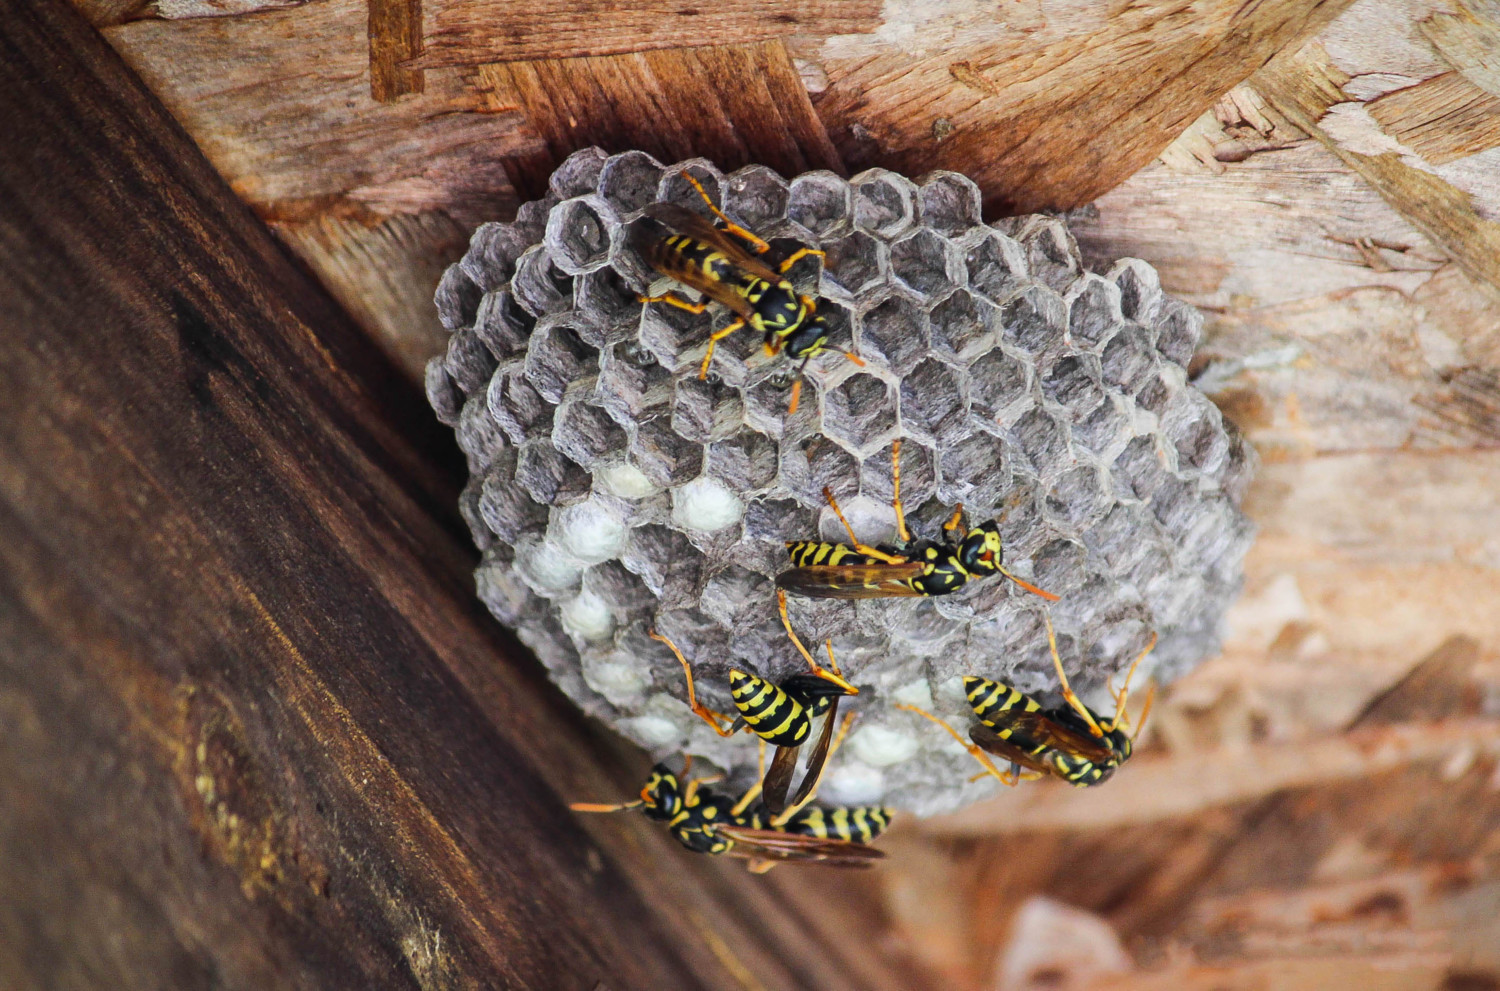 wasps nest with wasps